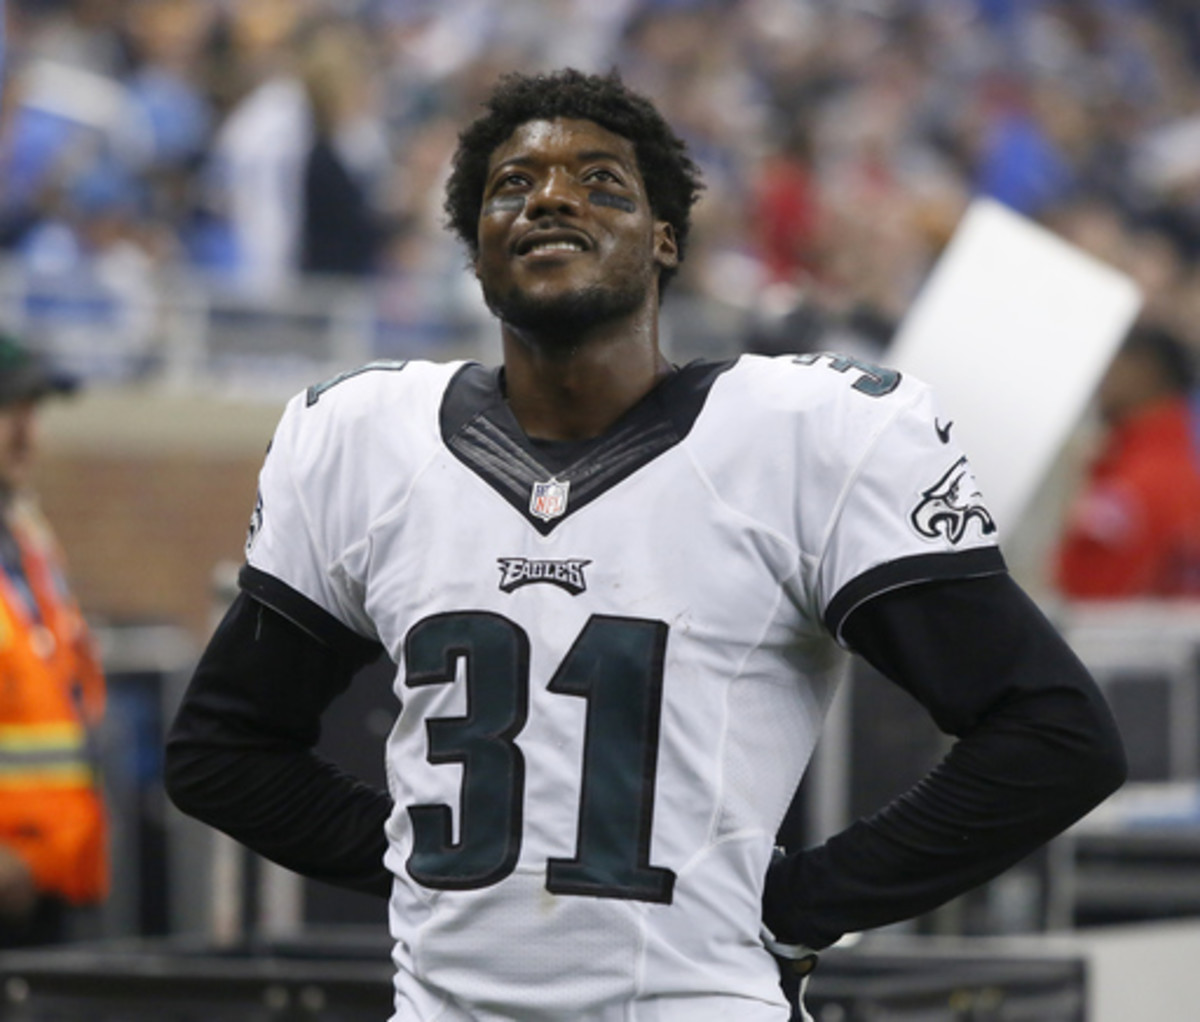 Philadelphia Eagles cornerback Byron Maxwell (31) watches a replay of Detroit Lions running back Joique Bell's touchdown during the second half of an NFL football game, Thursday, Nov. 26, 2015, in Detroit. The Lions defeated the Eagles 45-14. (AP Photo/Du